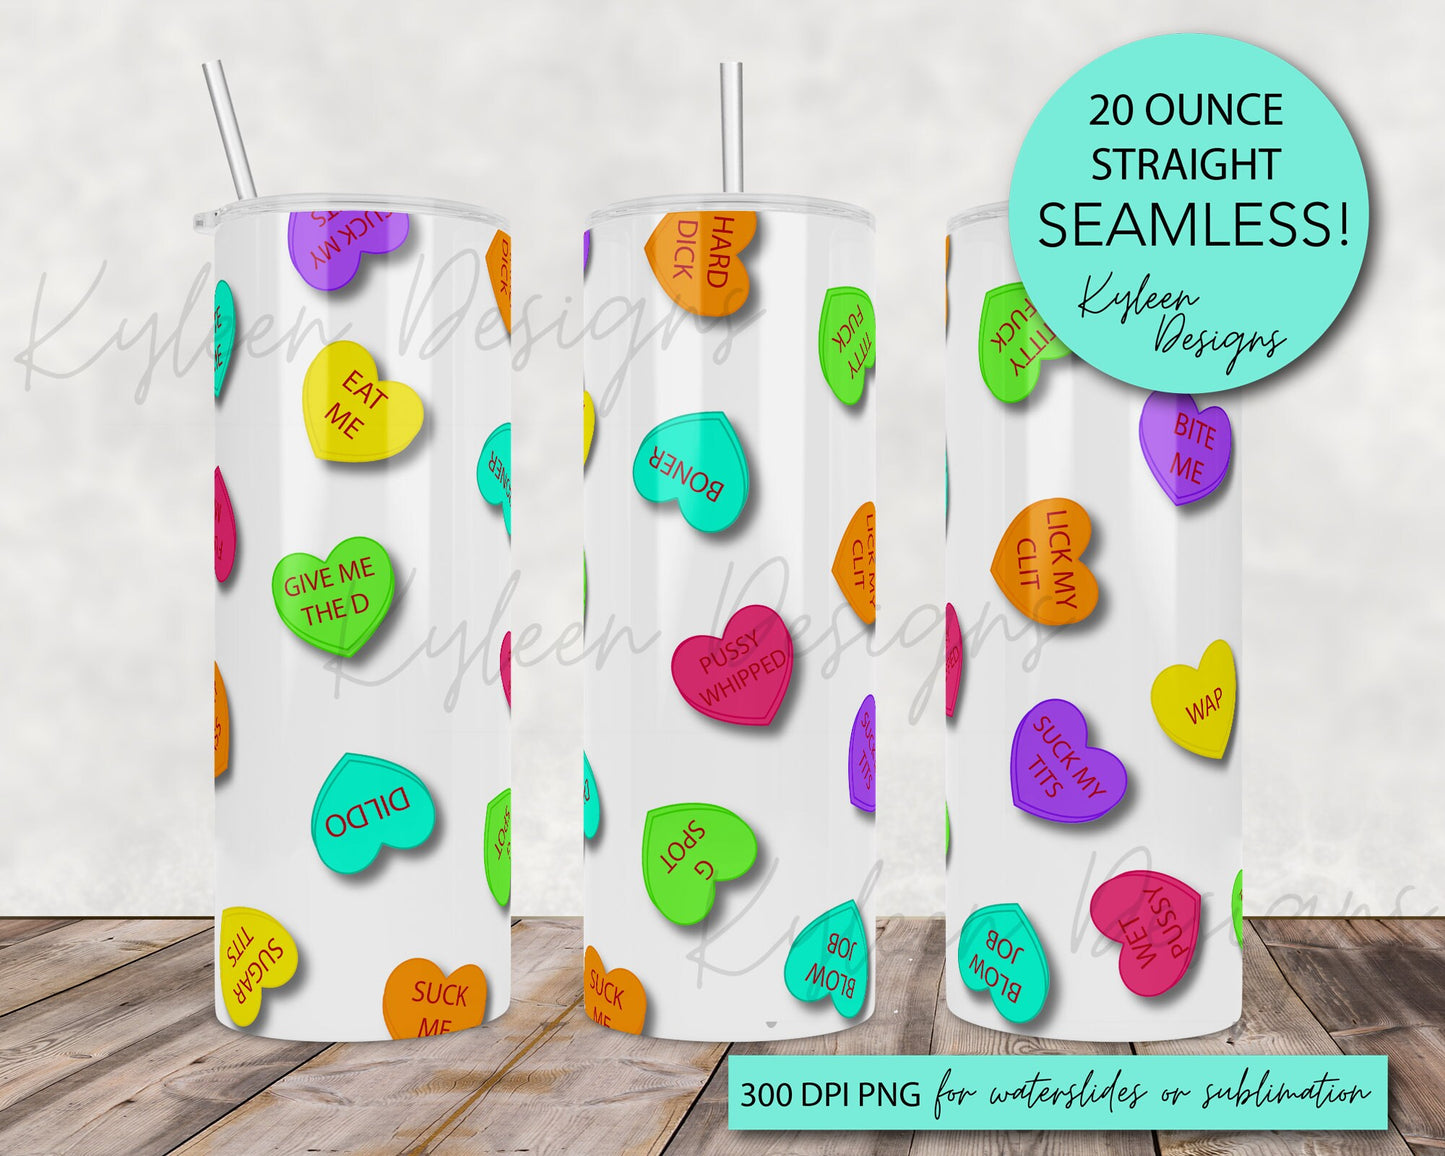 SEAMLESS naughty convo hearts 20 ounce wrap for sublimation, waterslide High res PNG digital file- Straight only